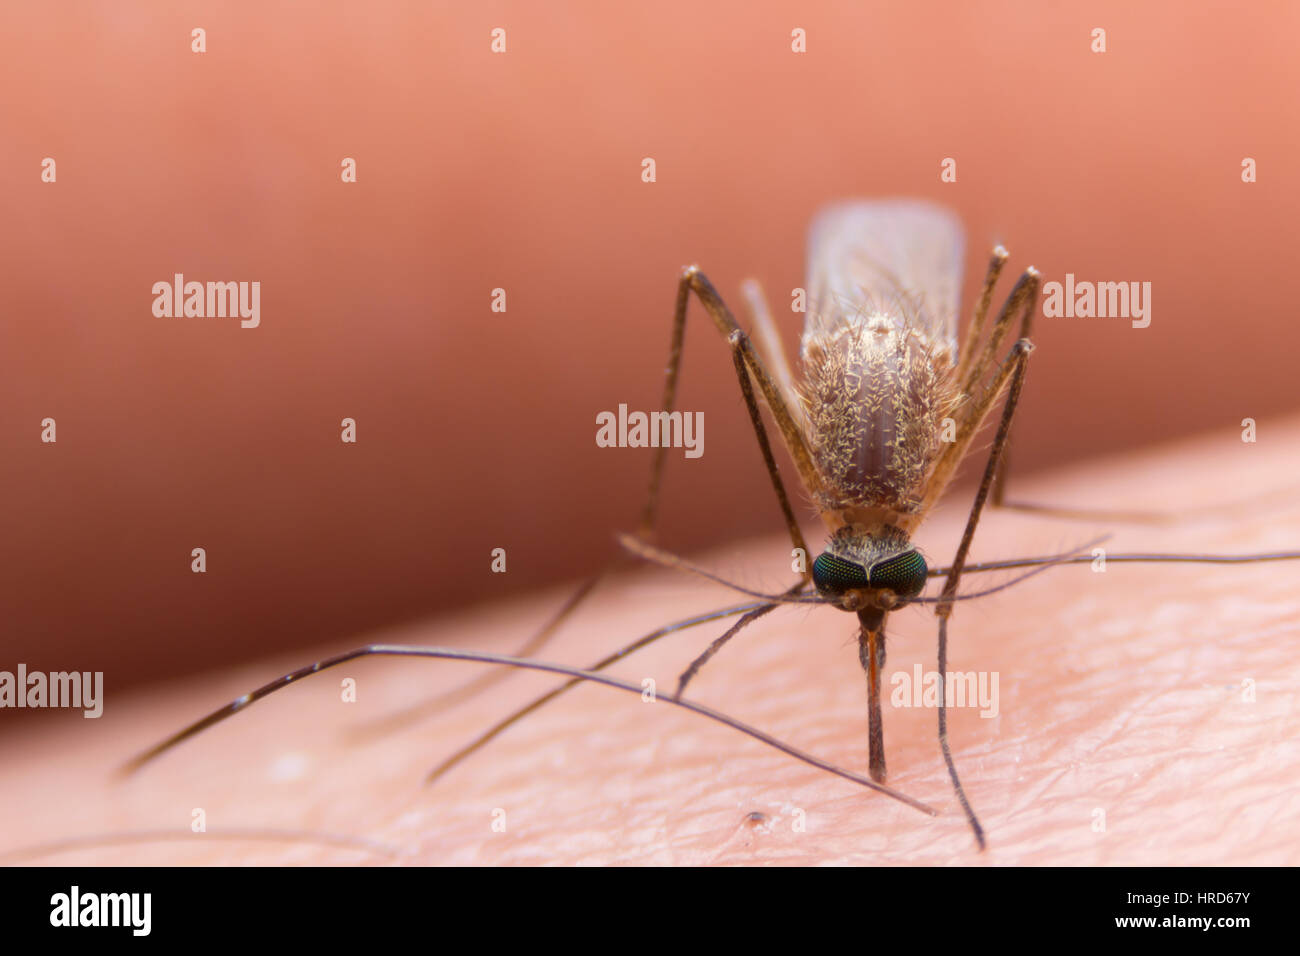 aedes, aegypti, animal, annoying, antenna, asian, biology, bite, black, blood, bug, carrier, close up, close-up, closeup, culicidae, danger, dangerous Stock Photo